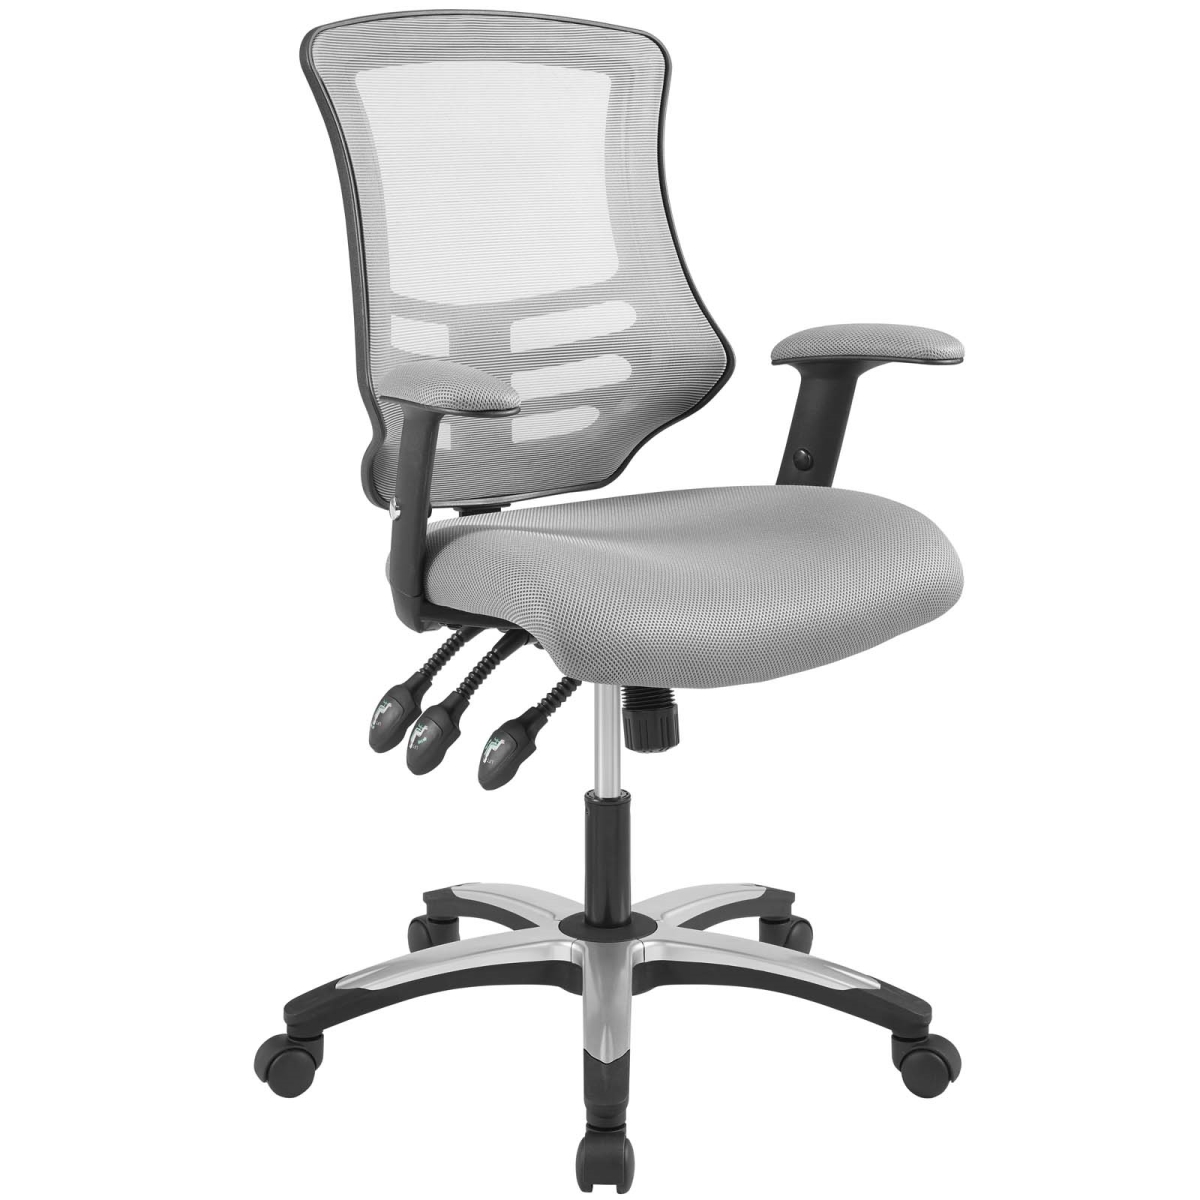 Eei-3042-gry Calibrate Mesh Office Chair - Gray, 38.5 - 46 X 27 X 26.5 In.